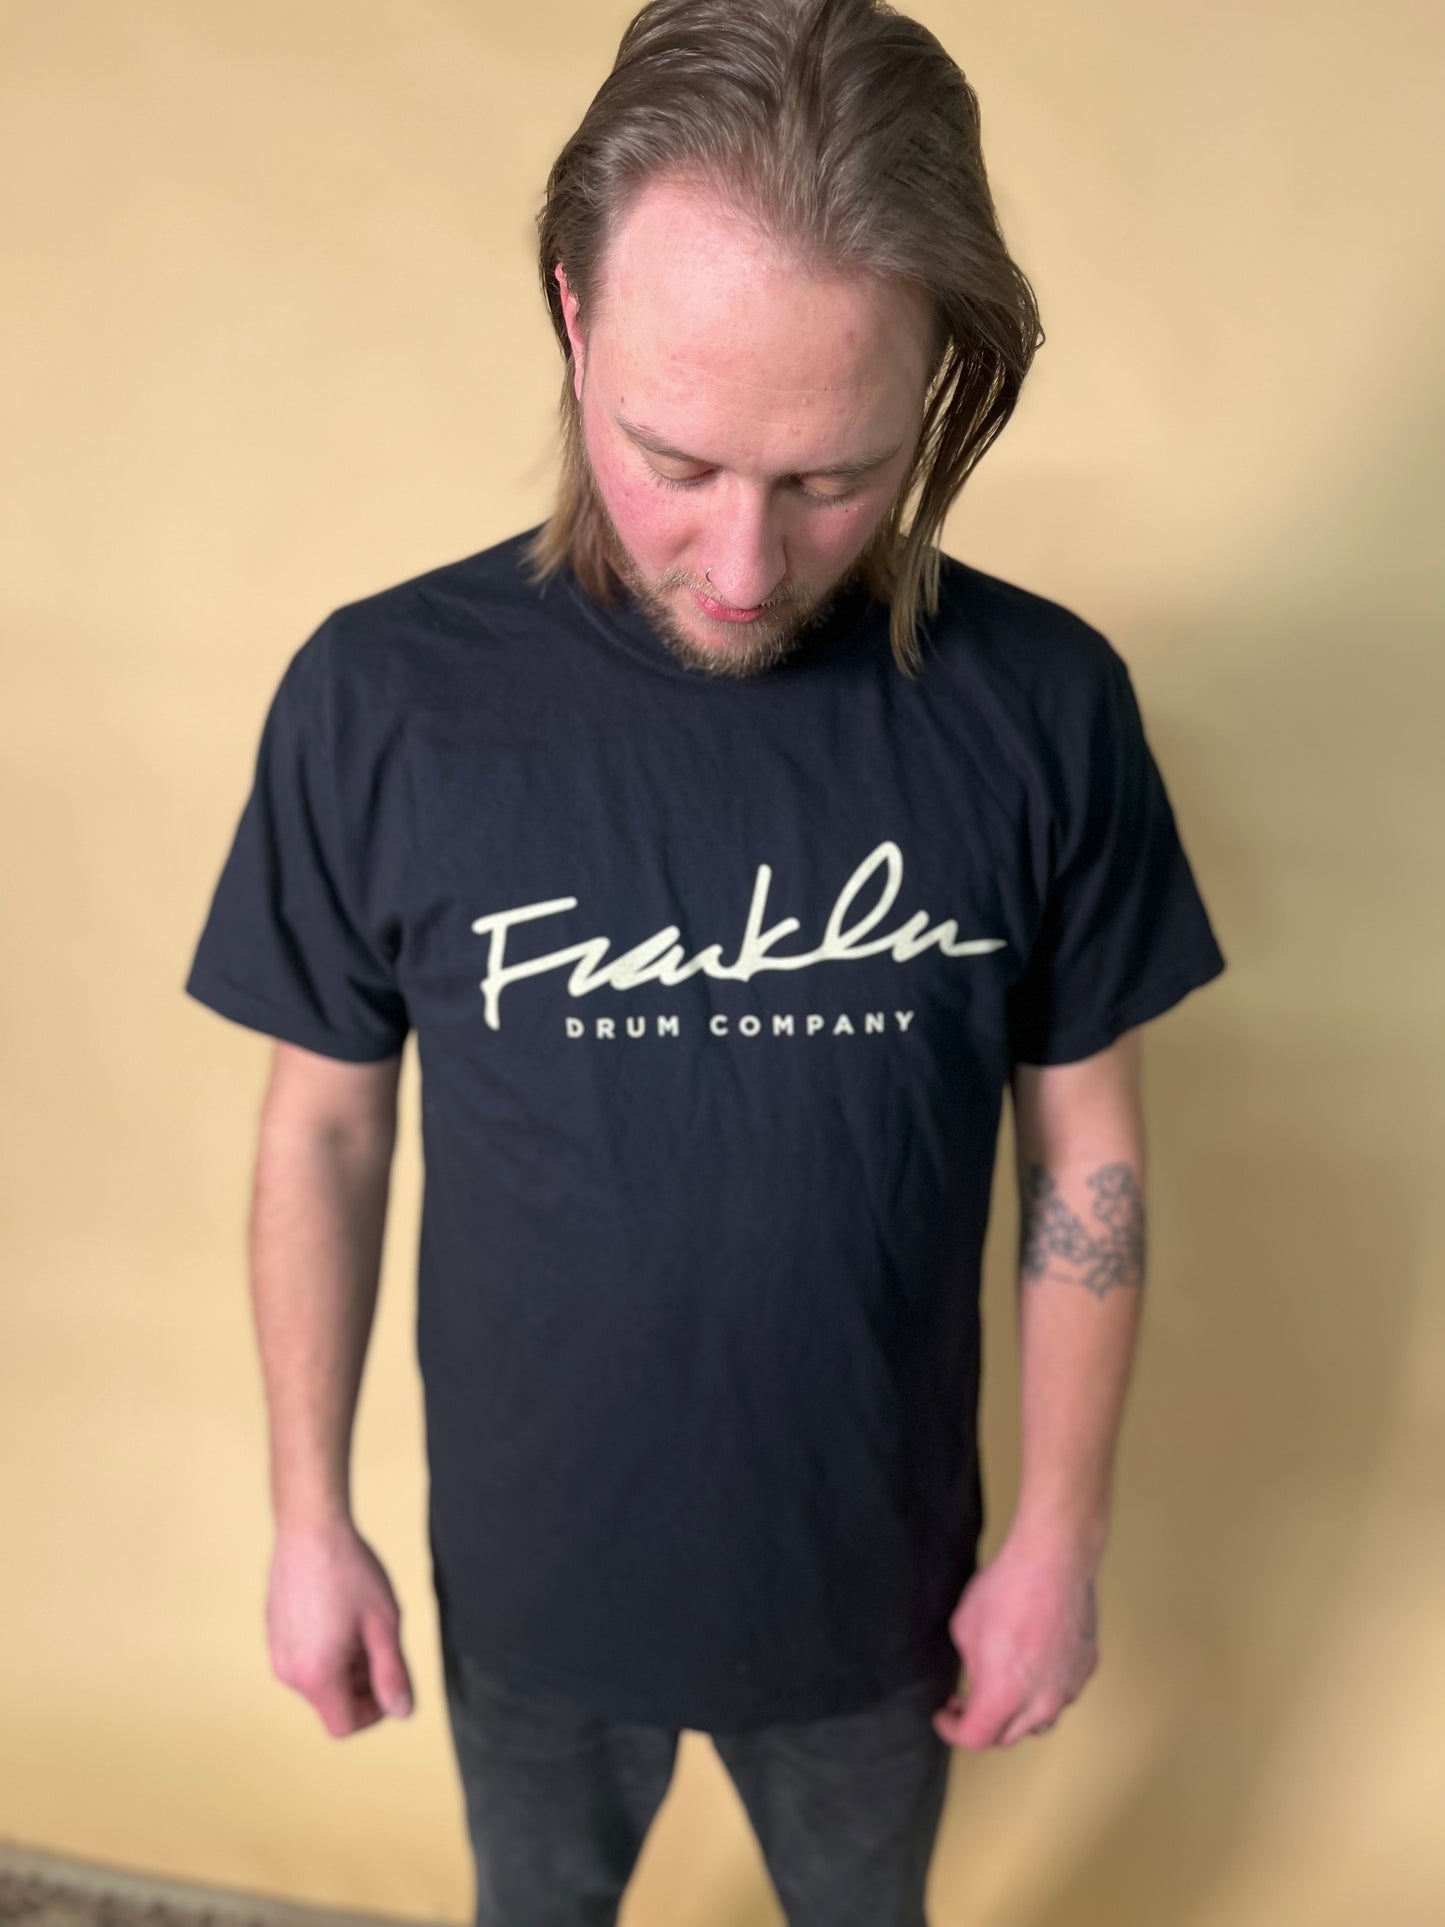 The Franklin T